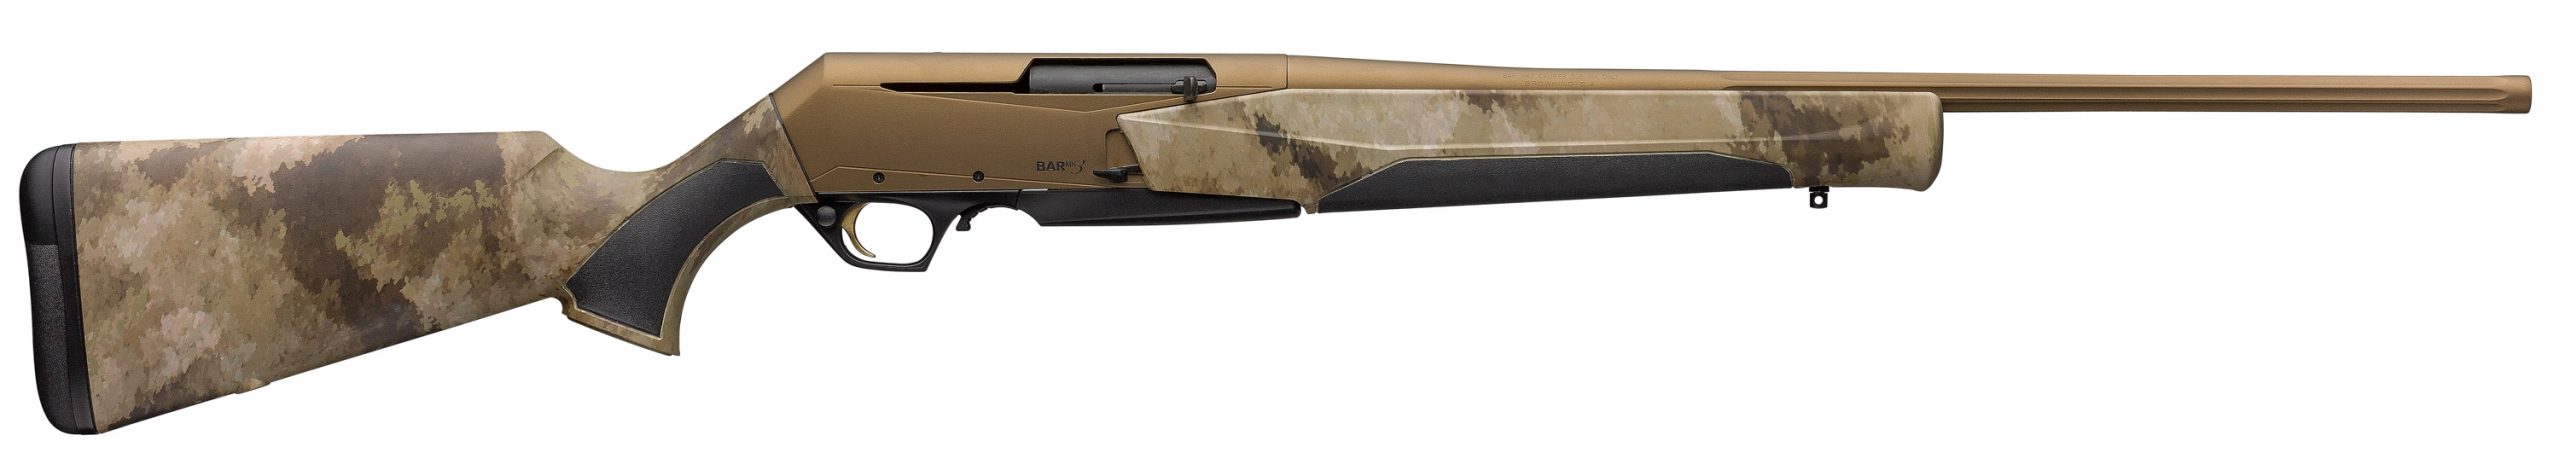 Browning Bar Mkiii Spd Ataca 308Win 22″ Hells Canyon Speed | A-Tacs Br031 064211 Scaled